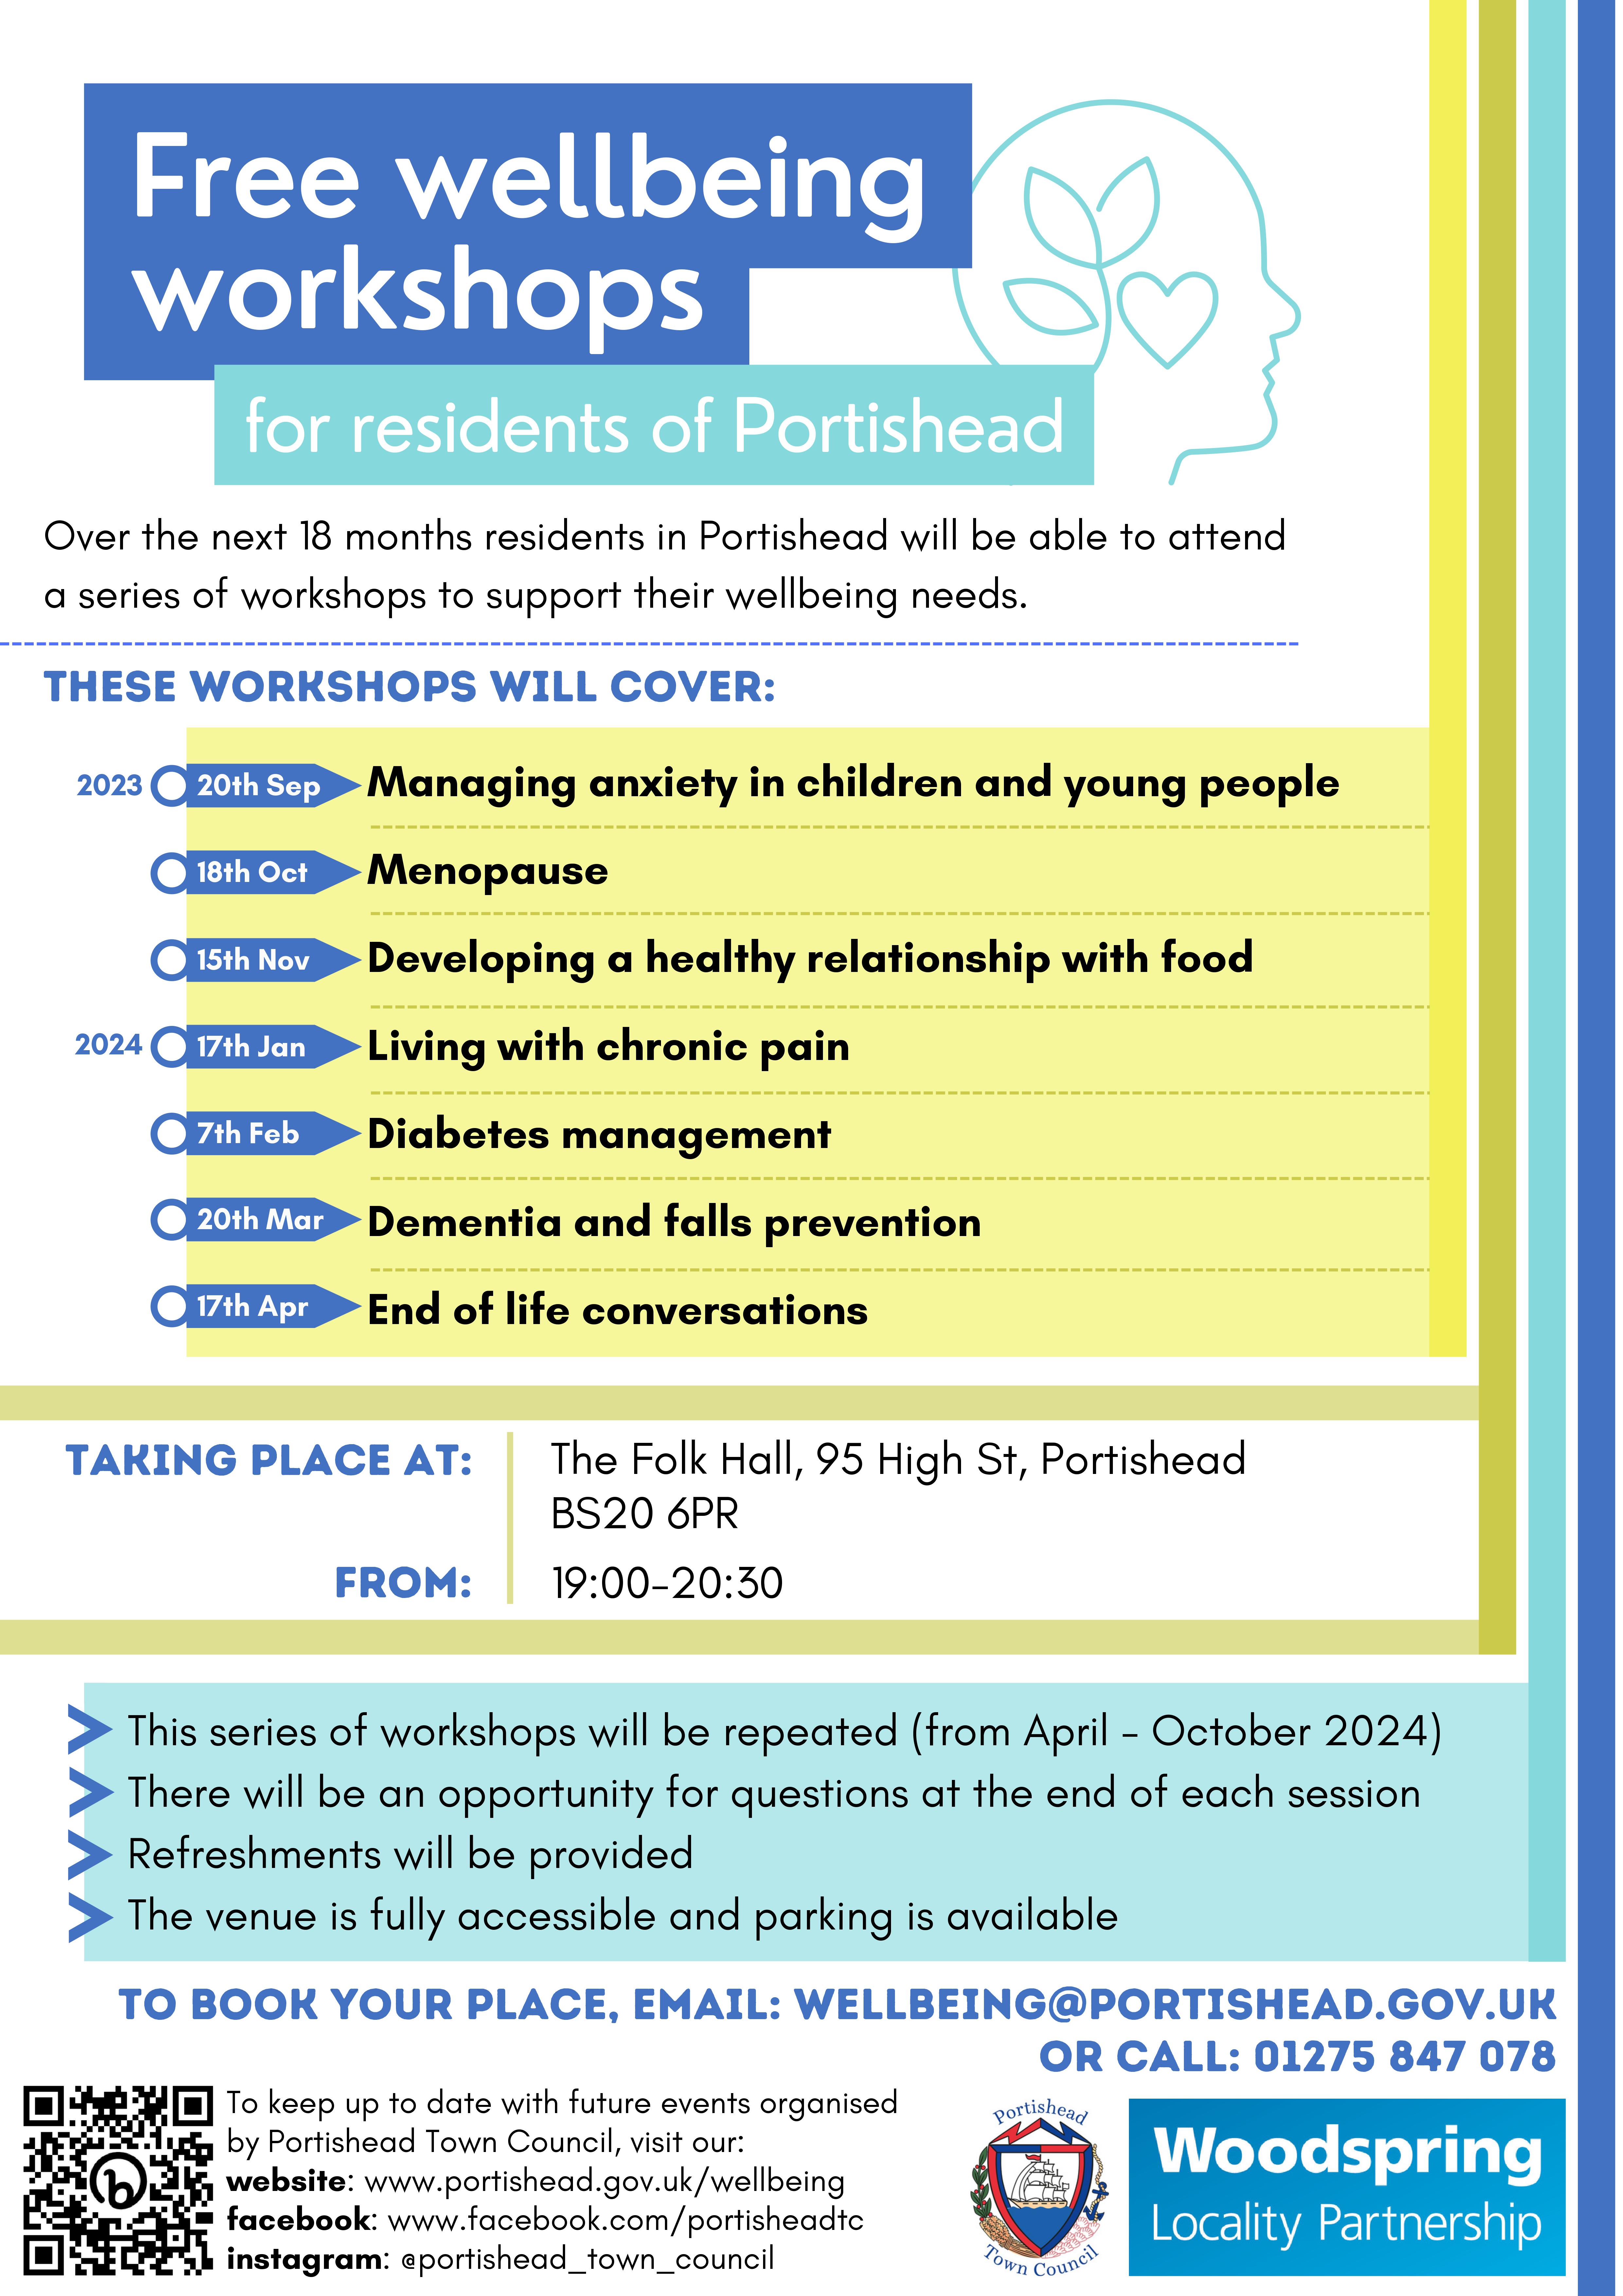 Information poster about free wellbeing workshops for residents of Portishead.